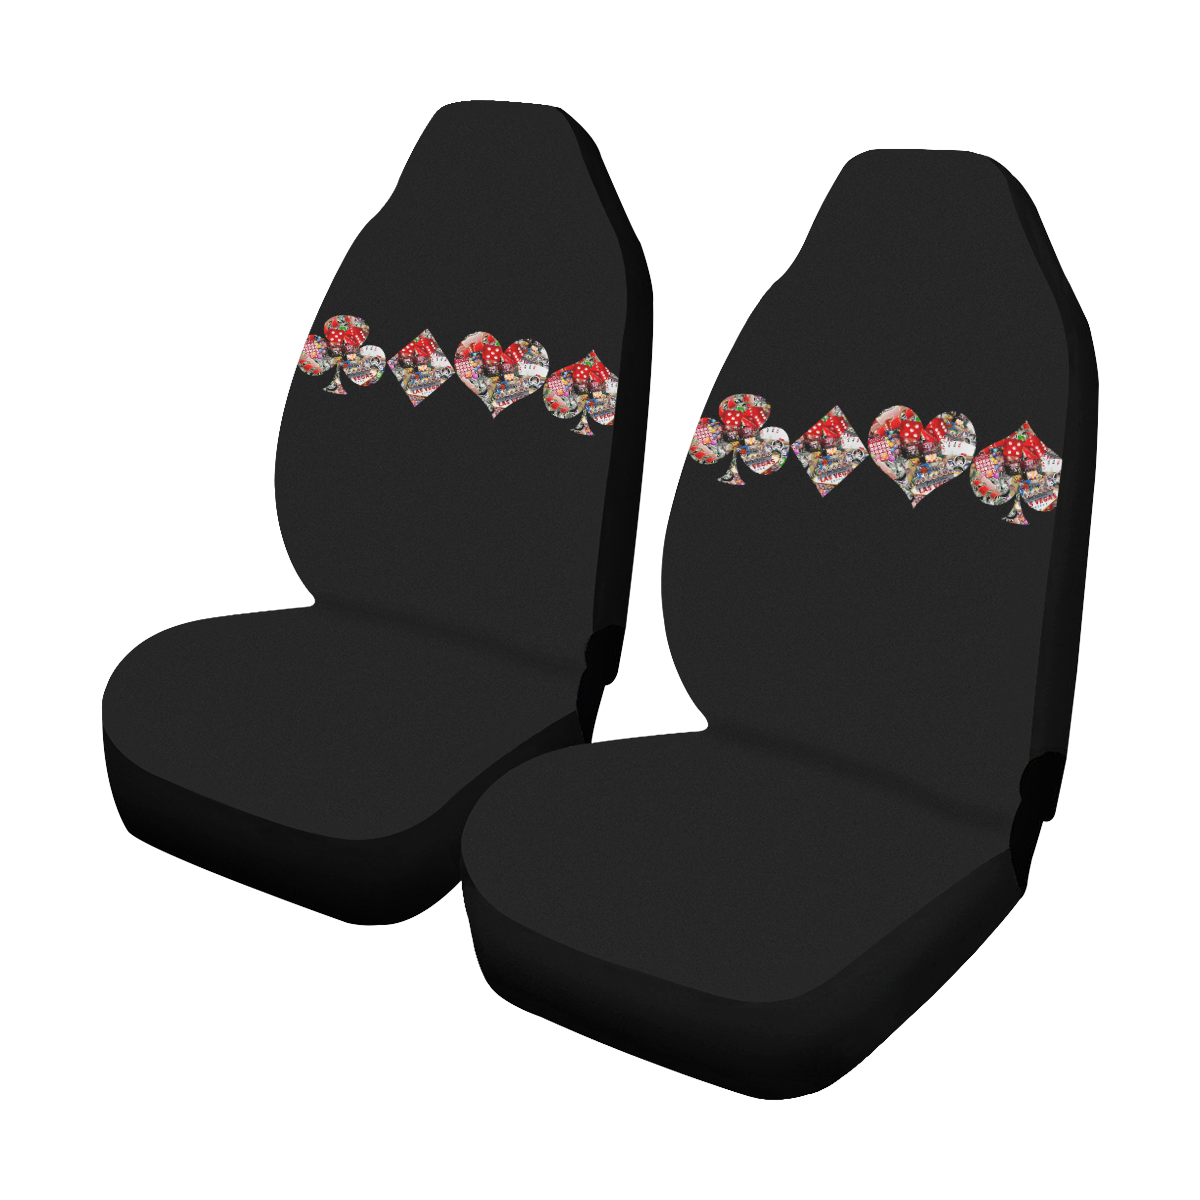 Las Vegas Playing Card Shapes Car Seat Covers (Set of 2)